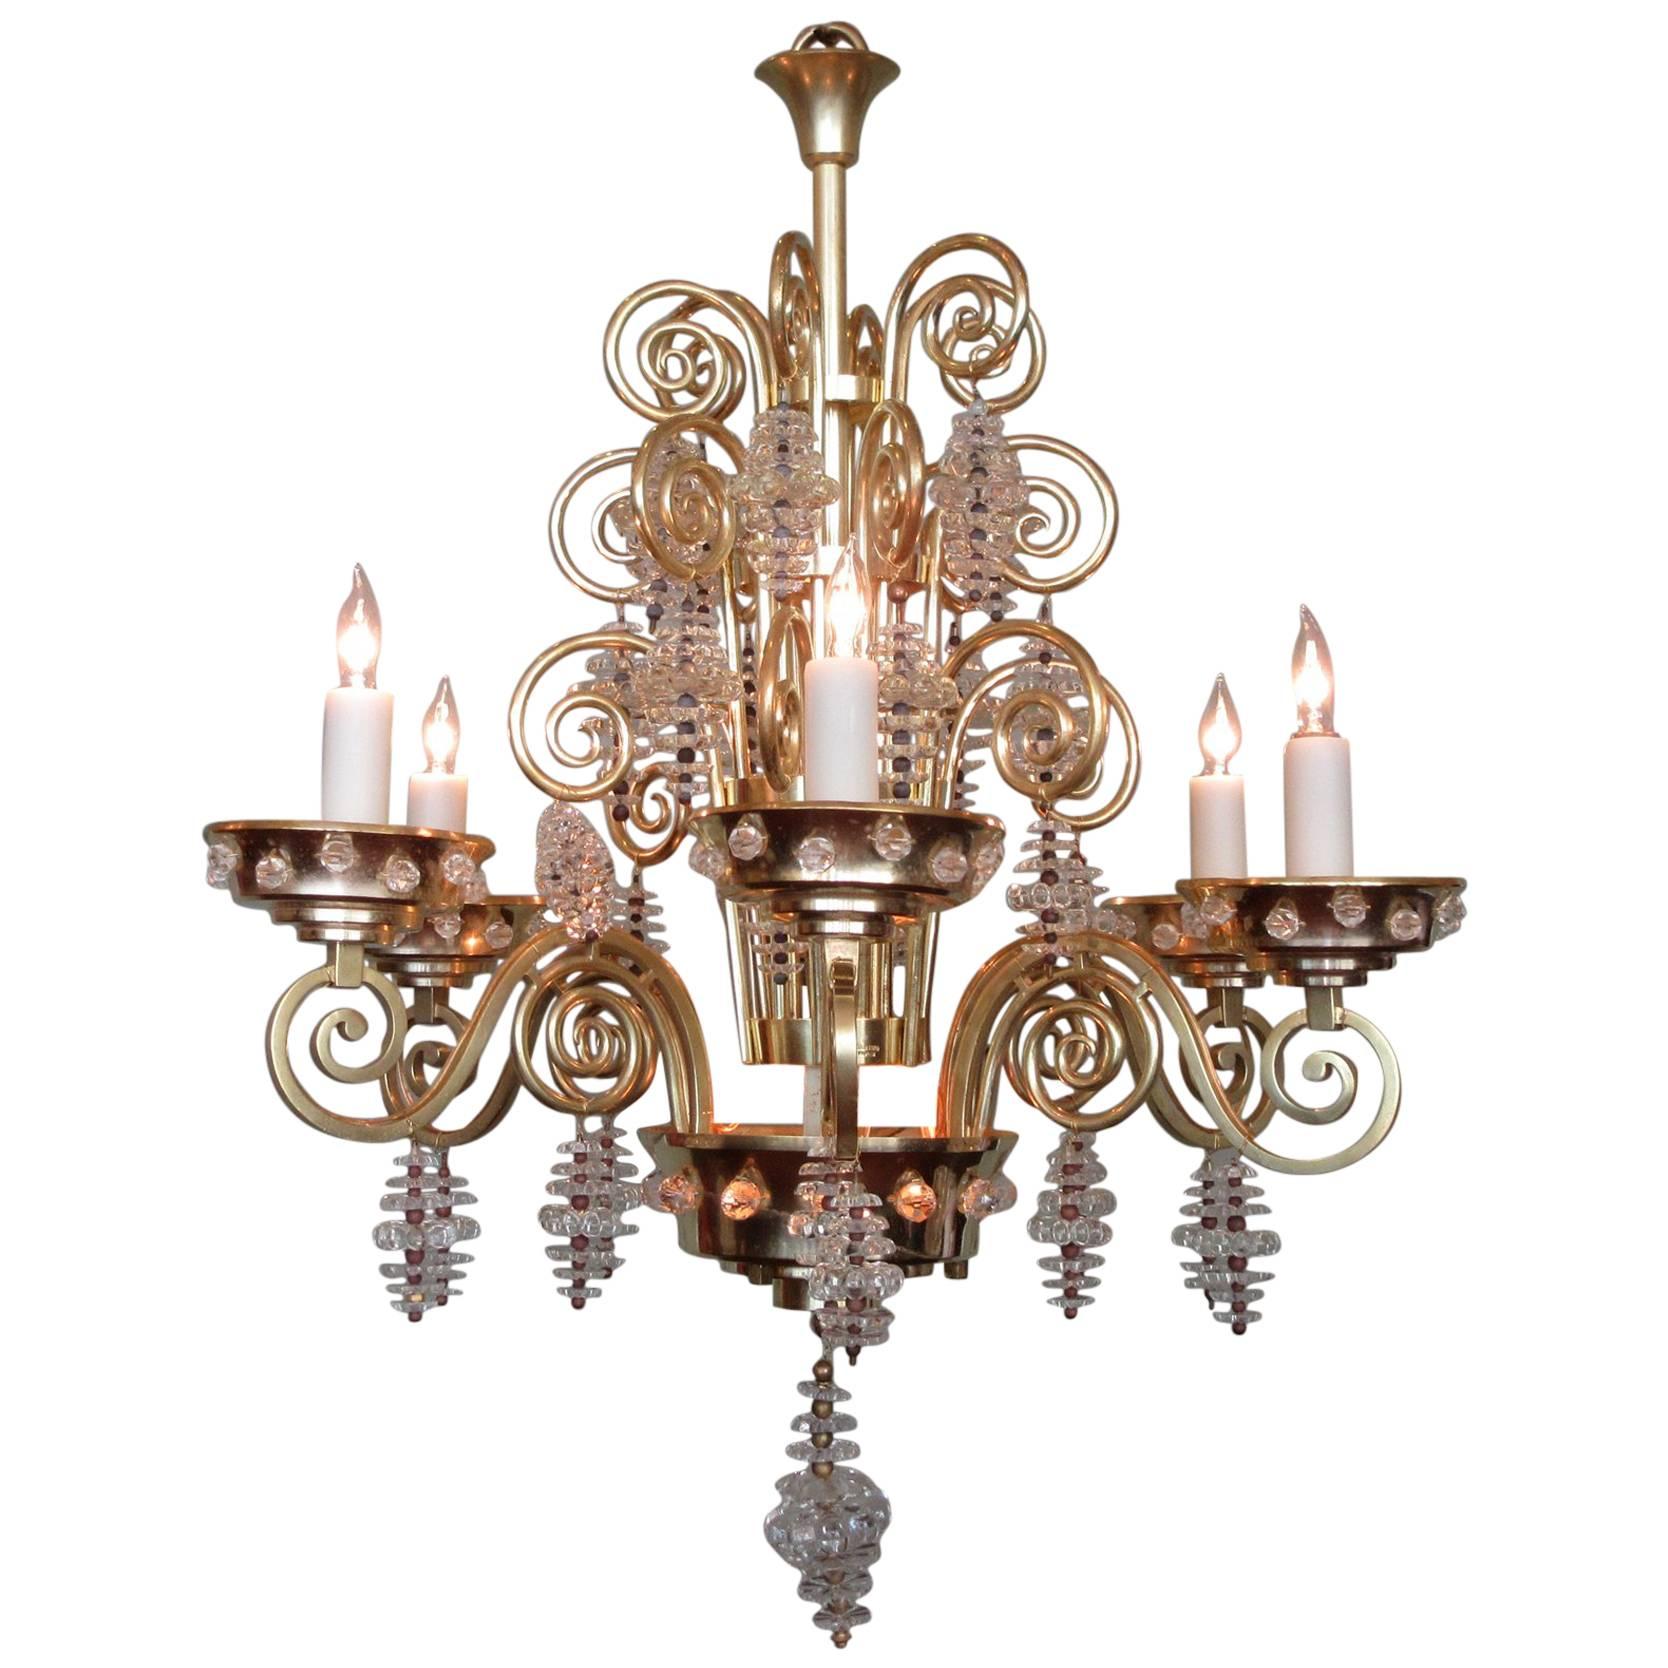 20th Century French Art Deco Bronze and Glass Chandelier by Glass Artist Sabino